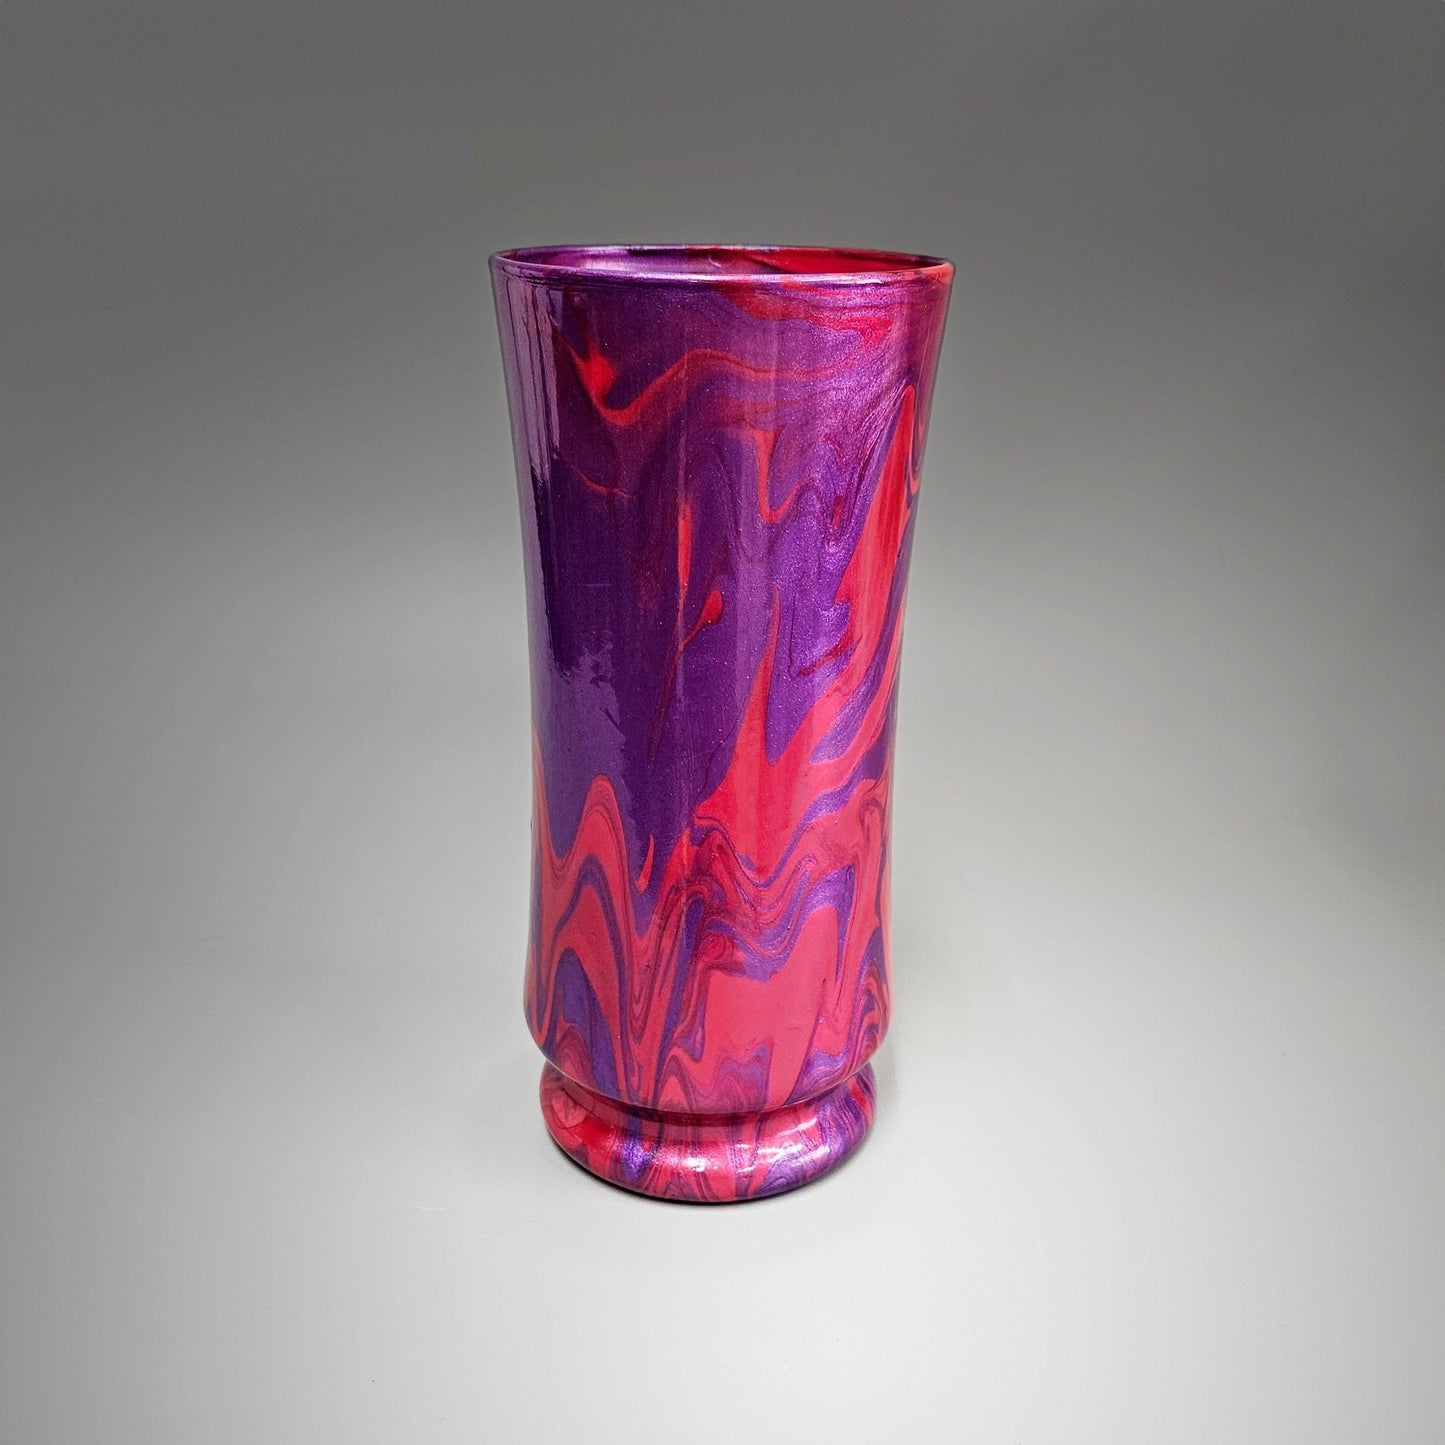 Painted Glass Vase in Purple and Rose Red